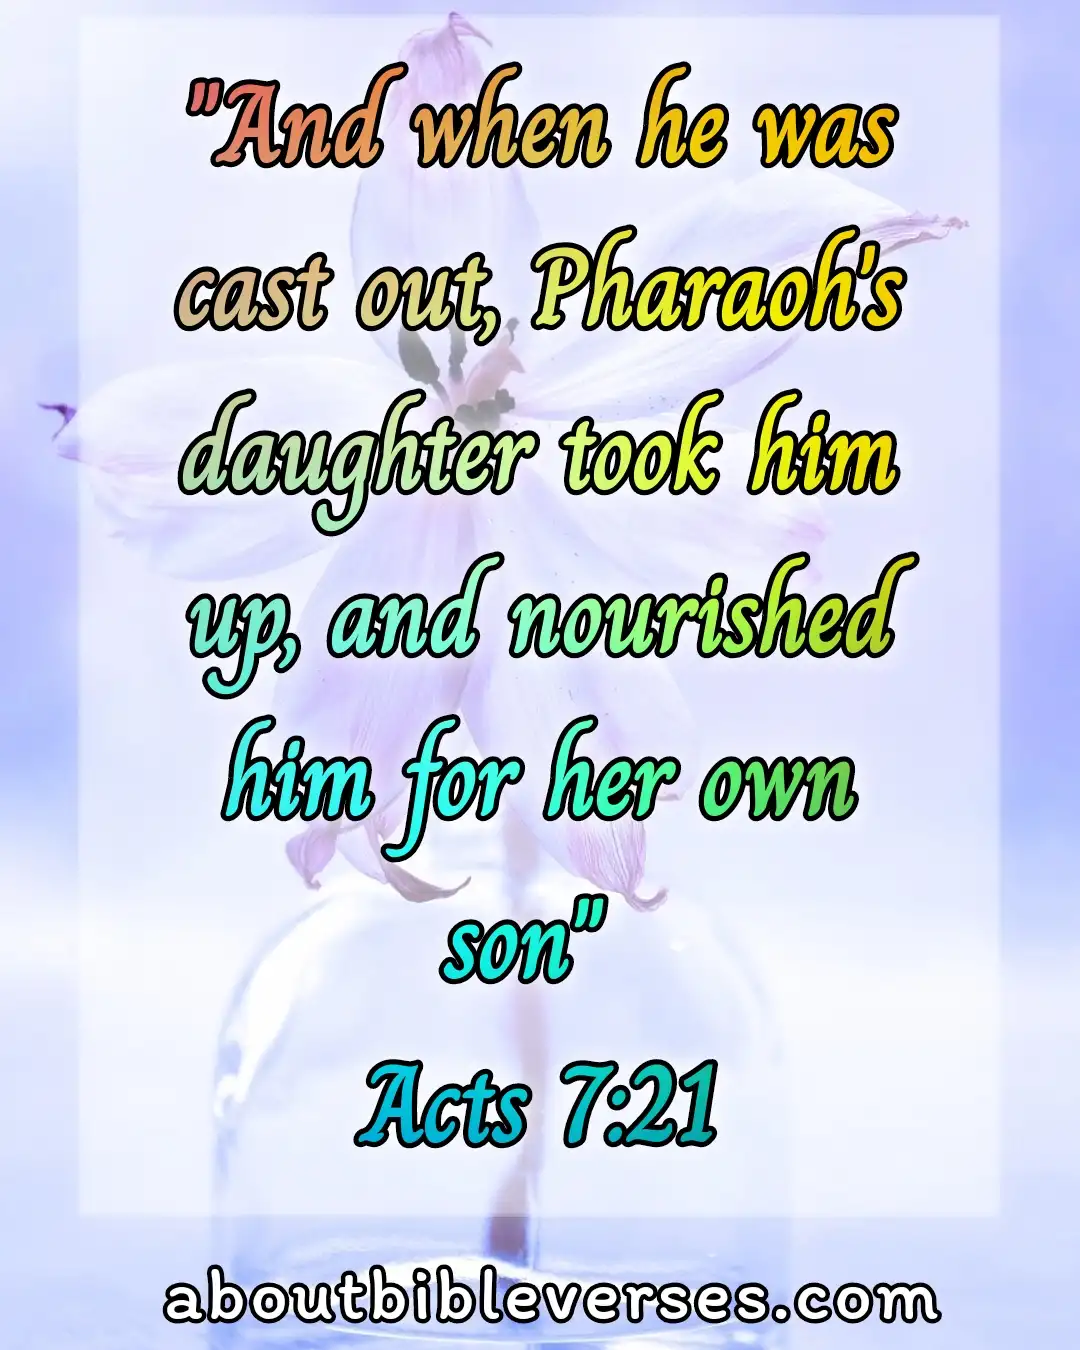 bible verses about adoption (Acts 7:21)